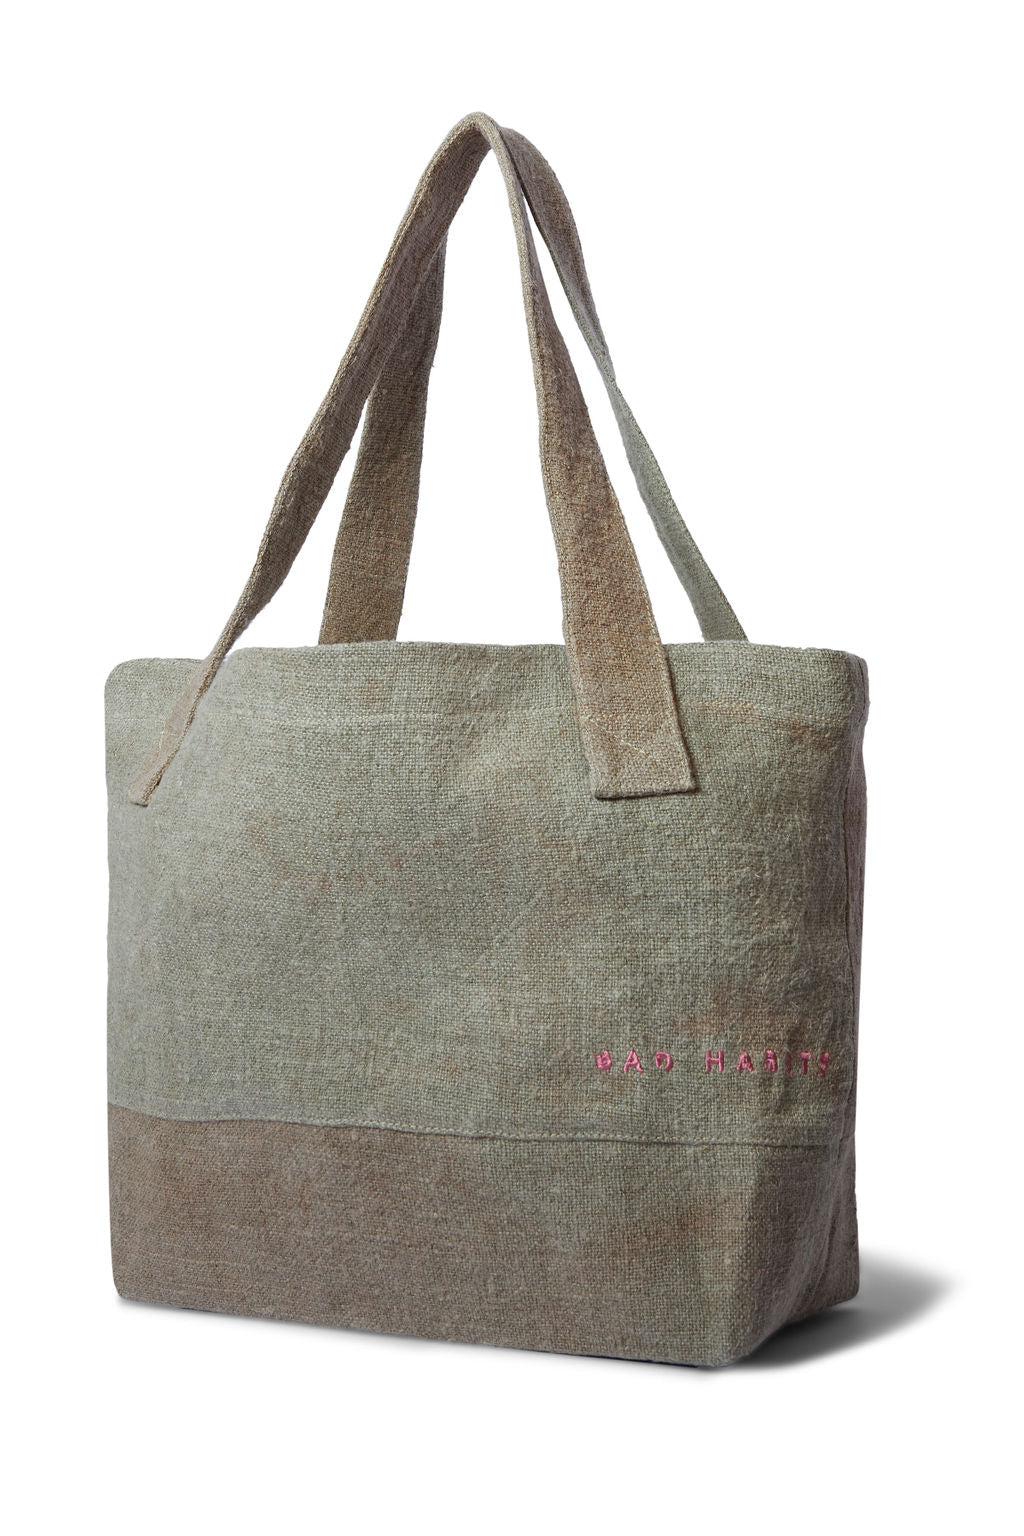 Sun Baked Tote Bag